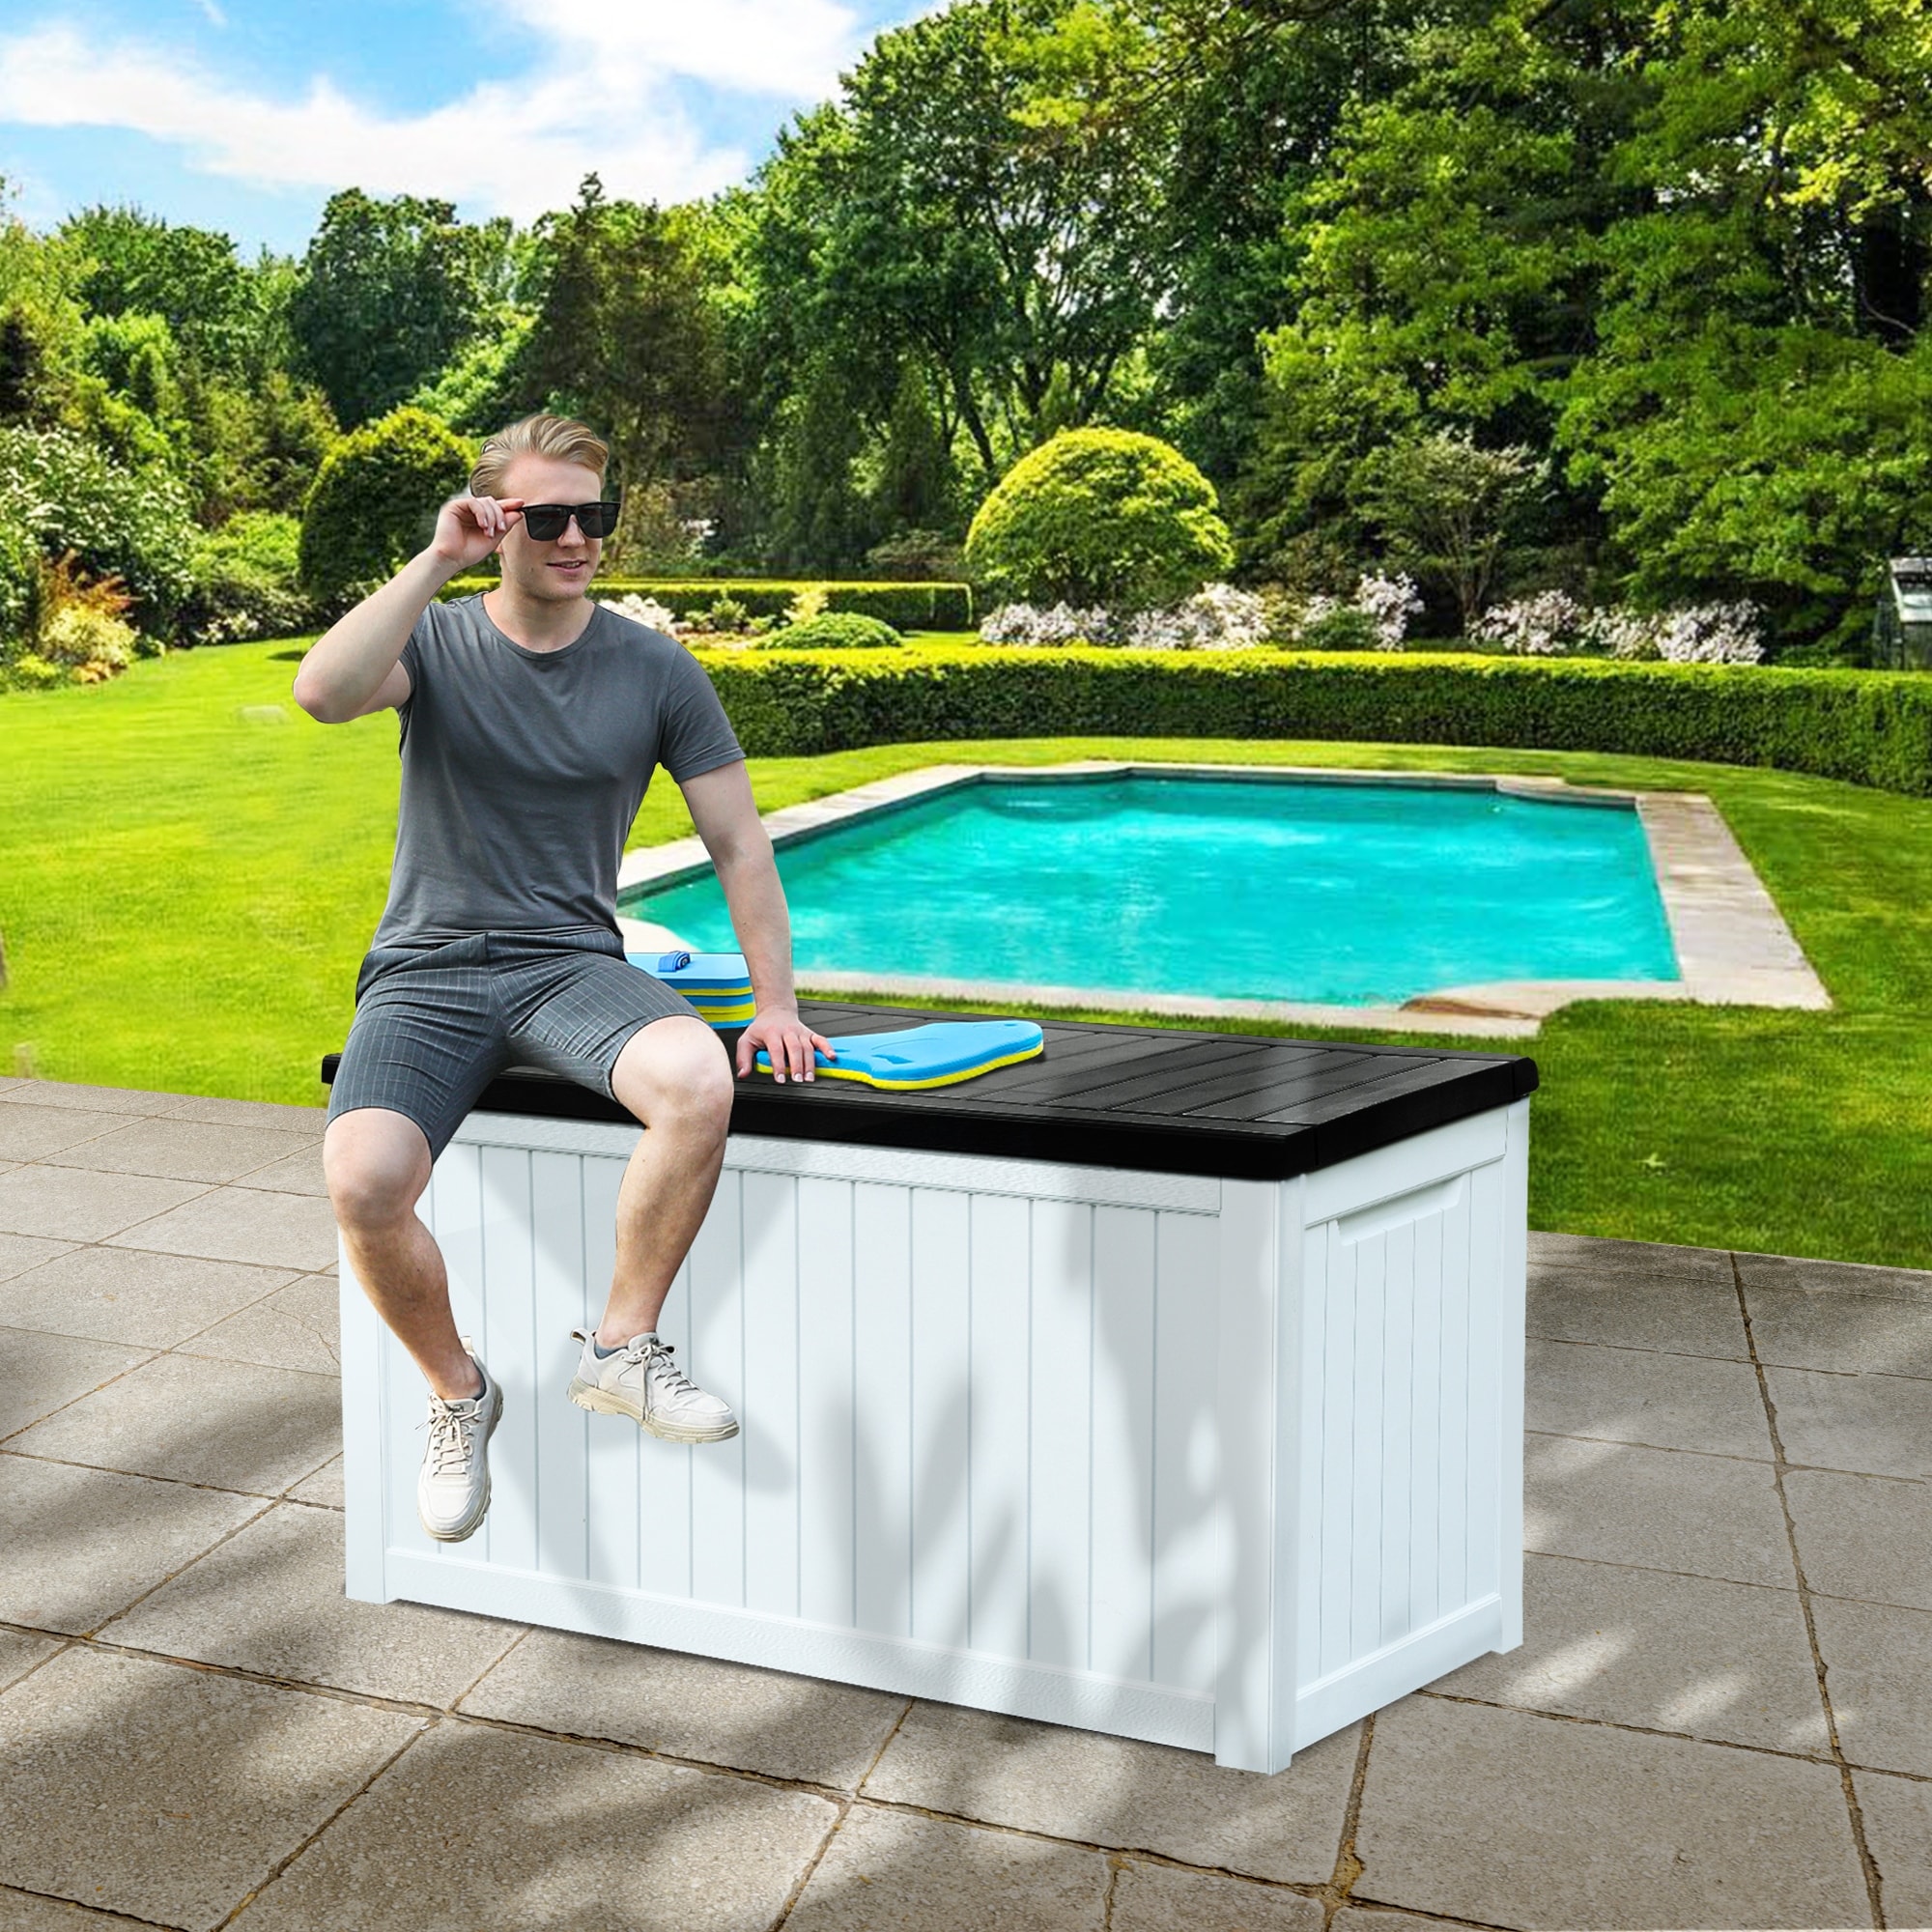 https://ak1.ostkcdn.com/images/products/is/images/direct/09a538d01e48fe255d7401655f7fd470a0609142/230-Gallon-Outdoor-Storage-Waterproof-Deck-Box.jpg